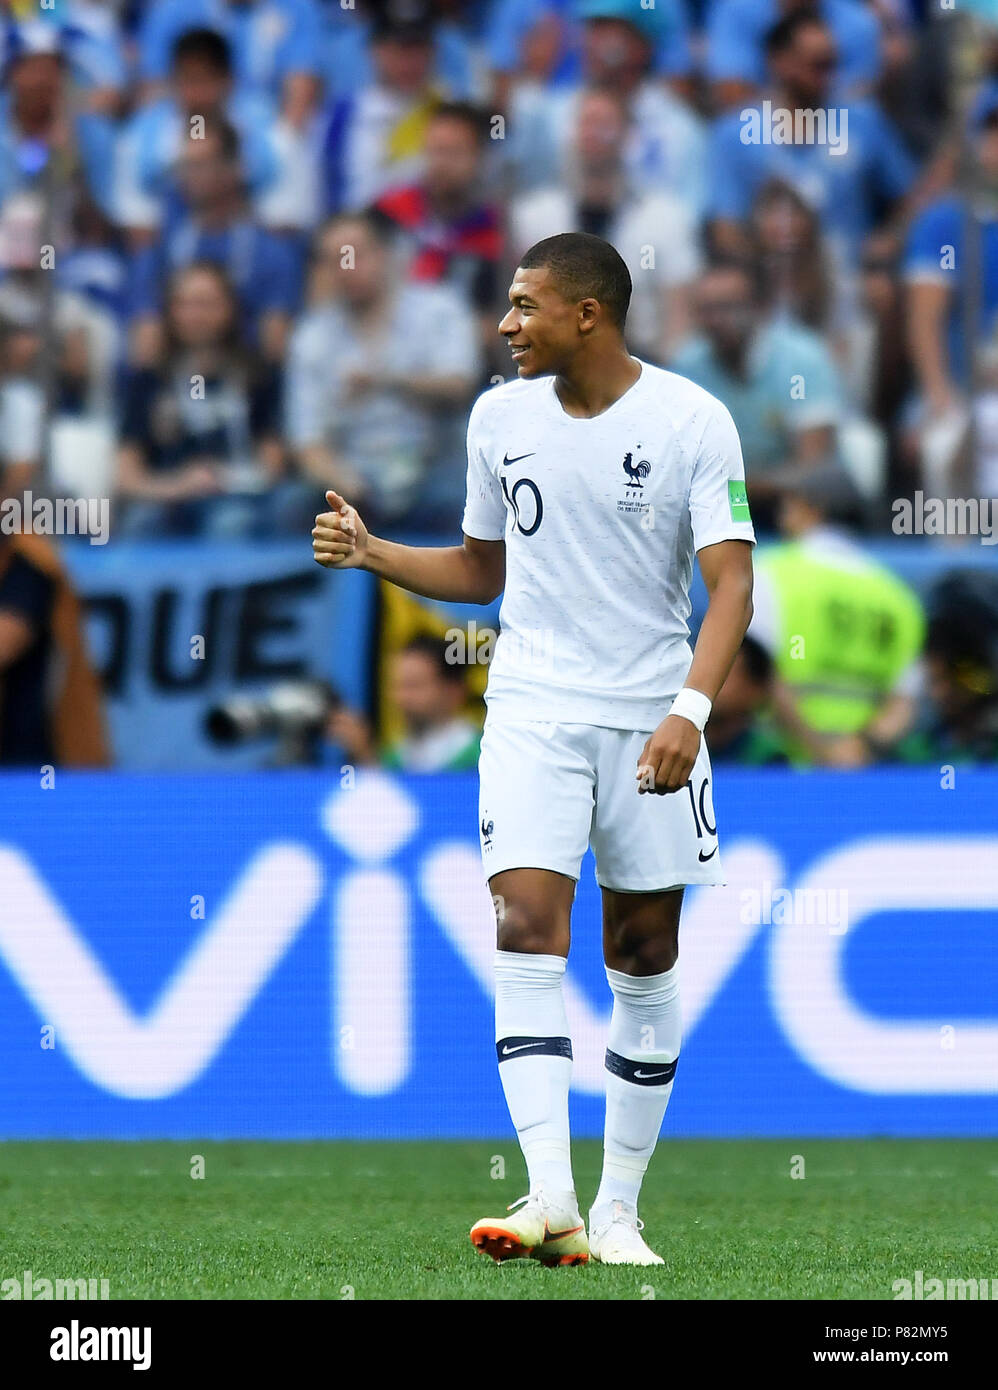 NIZHNY NOVGOROD, RUSSIA - JULY 06: Kylian Mbappe of France reacts during the 2018 FIFA World Cup Russia Quarter Final match between Uruguay and France at Nizhny Novgorod Stadium on July 6, 2018 in Nizhny Novgorod, Russia. (Photo by Lukasz Laskowski/PressFocus/MB Media) Stock Photo